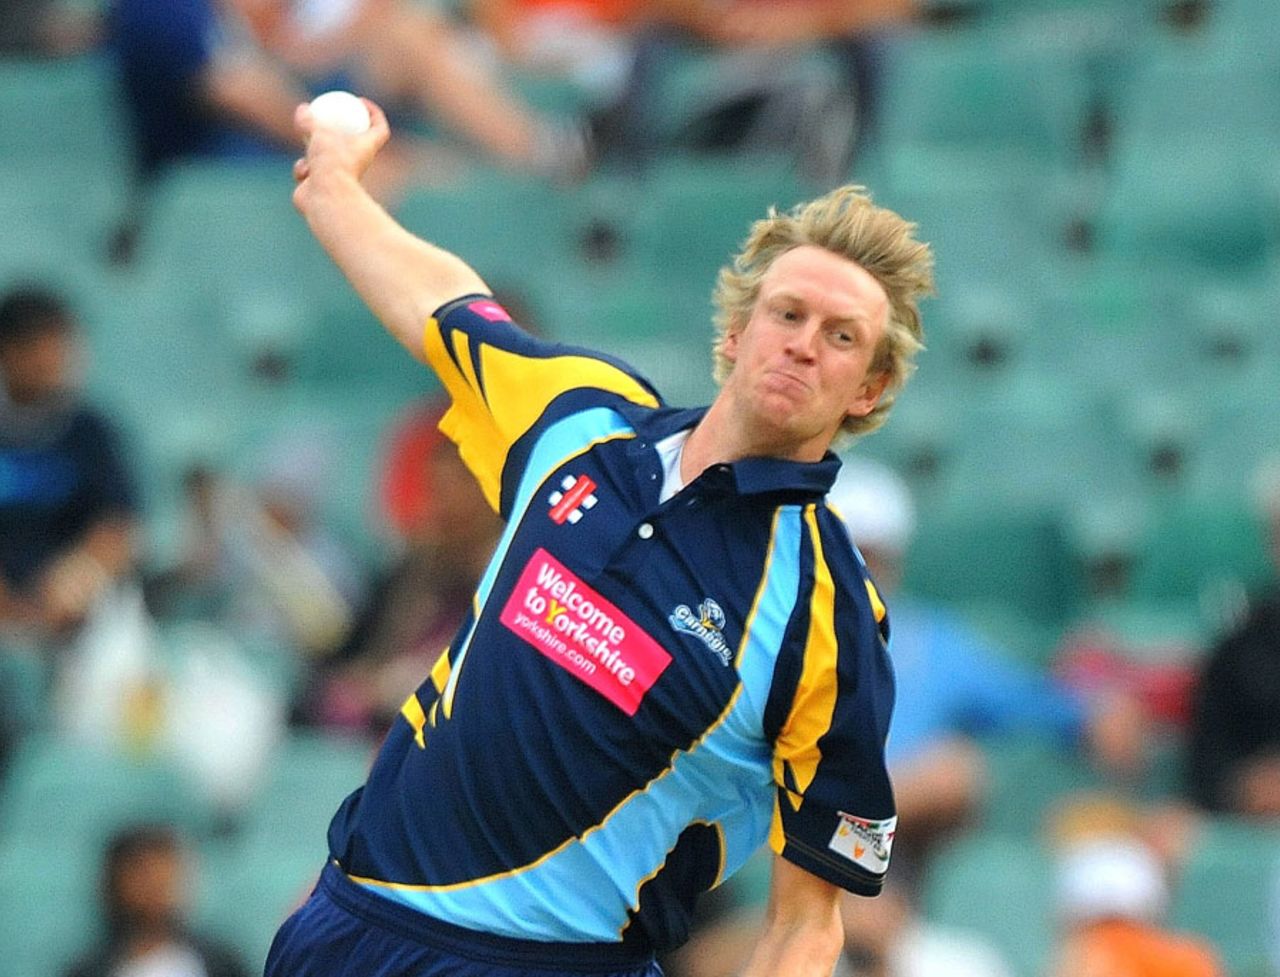 Steven Patterson picked up two wickets, Lions v Yorkshire, Champions League T20, Group B, Johannesburg, October 20, 2012